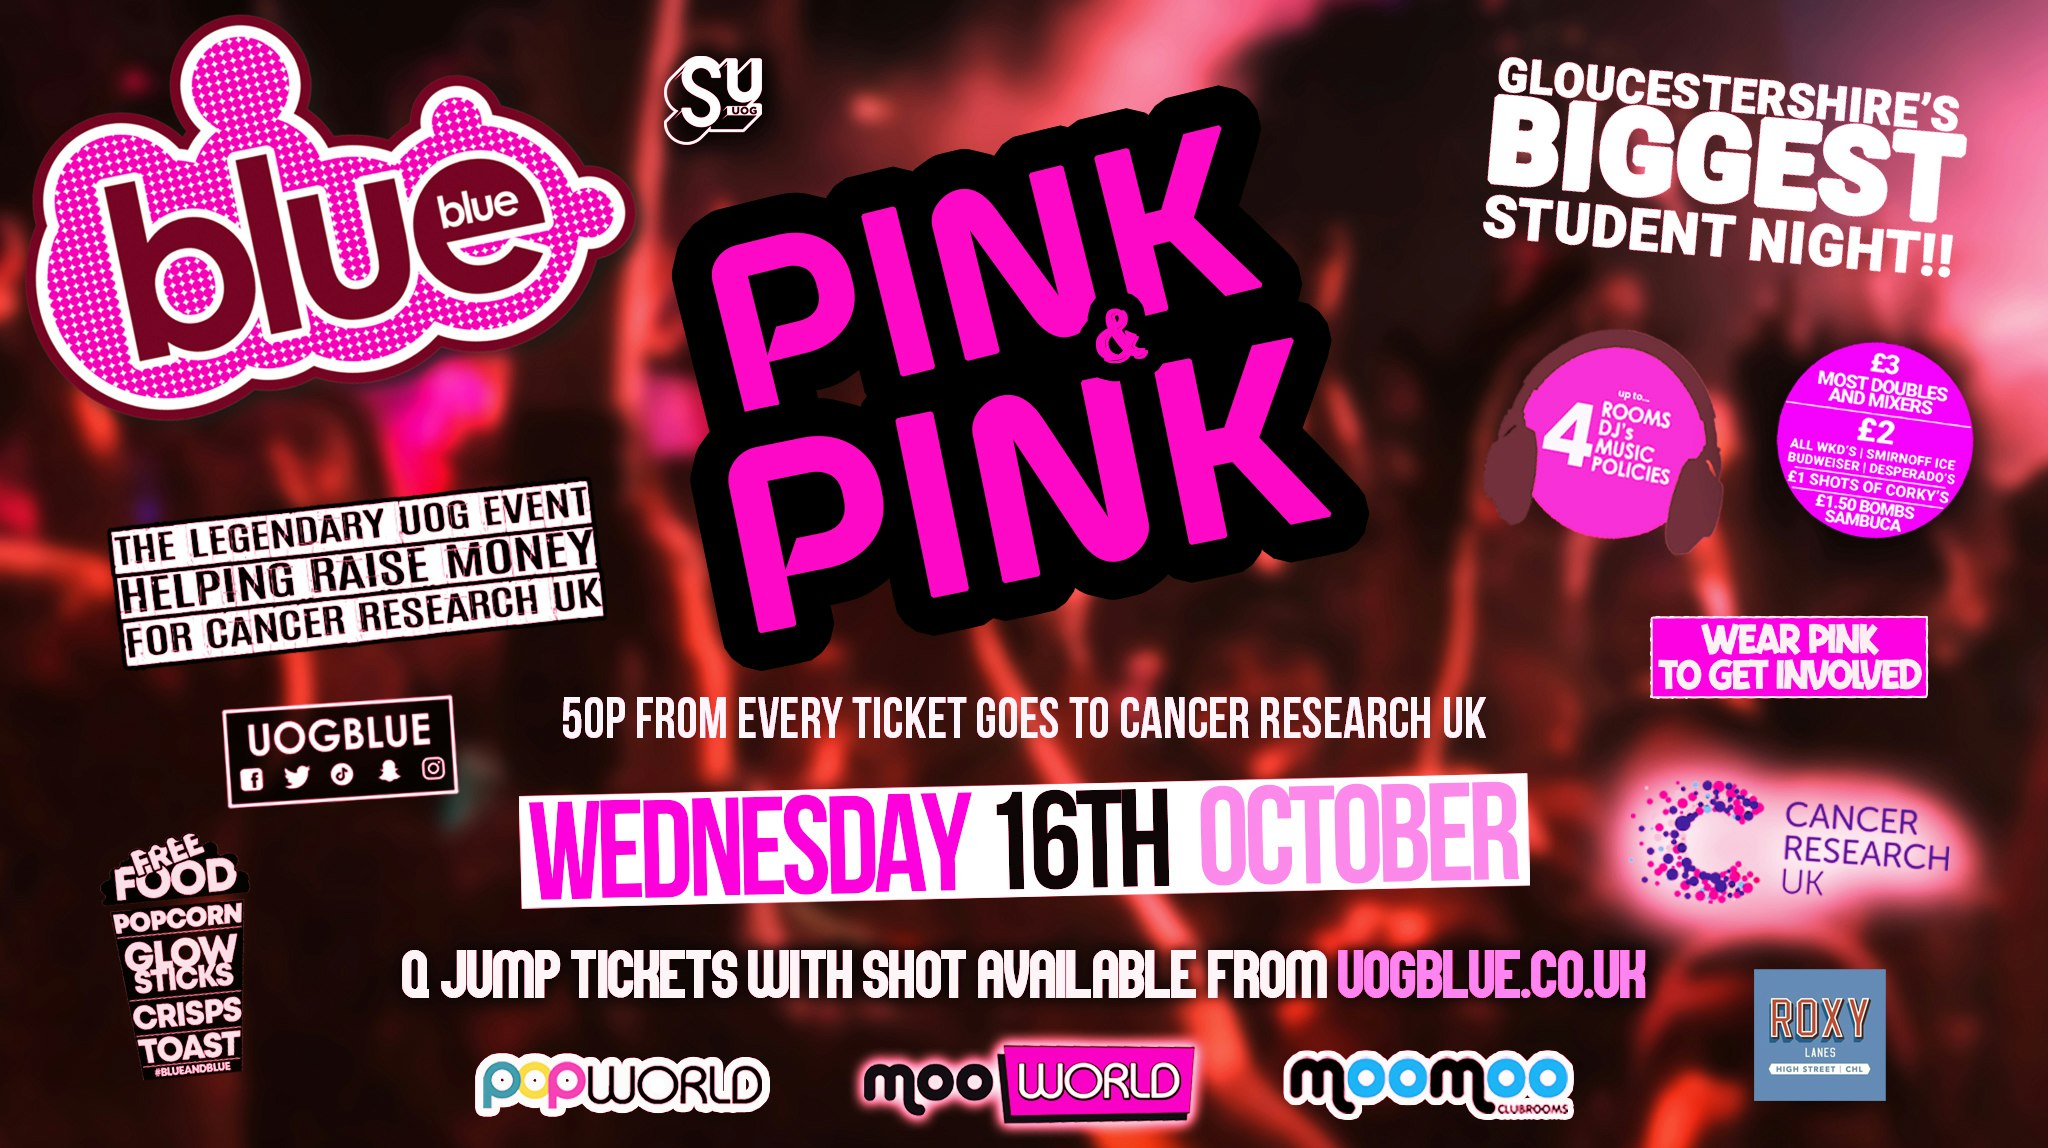 Blue and Blue 💗💗 PINK & PINK! 💗💗 Gloucestershire’s Biggest Student Night